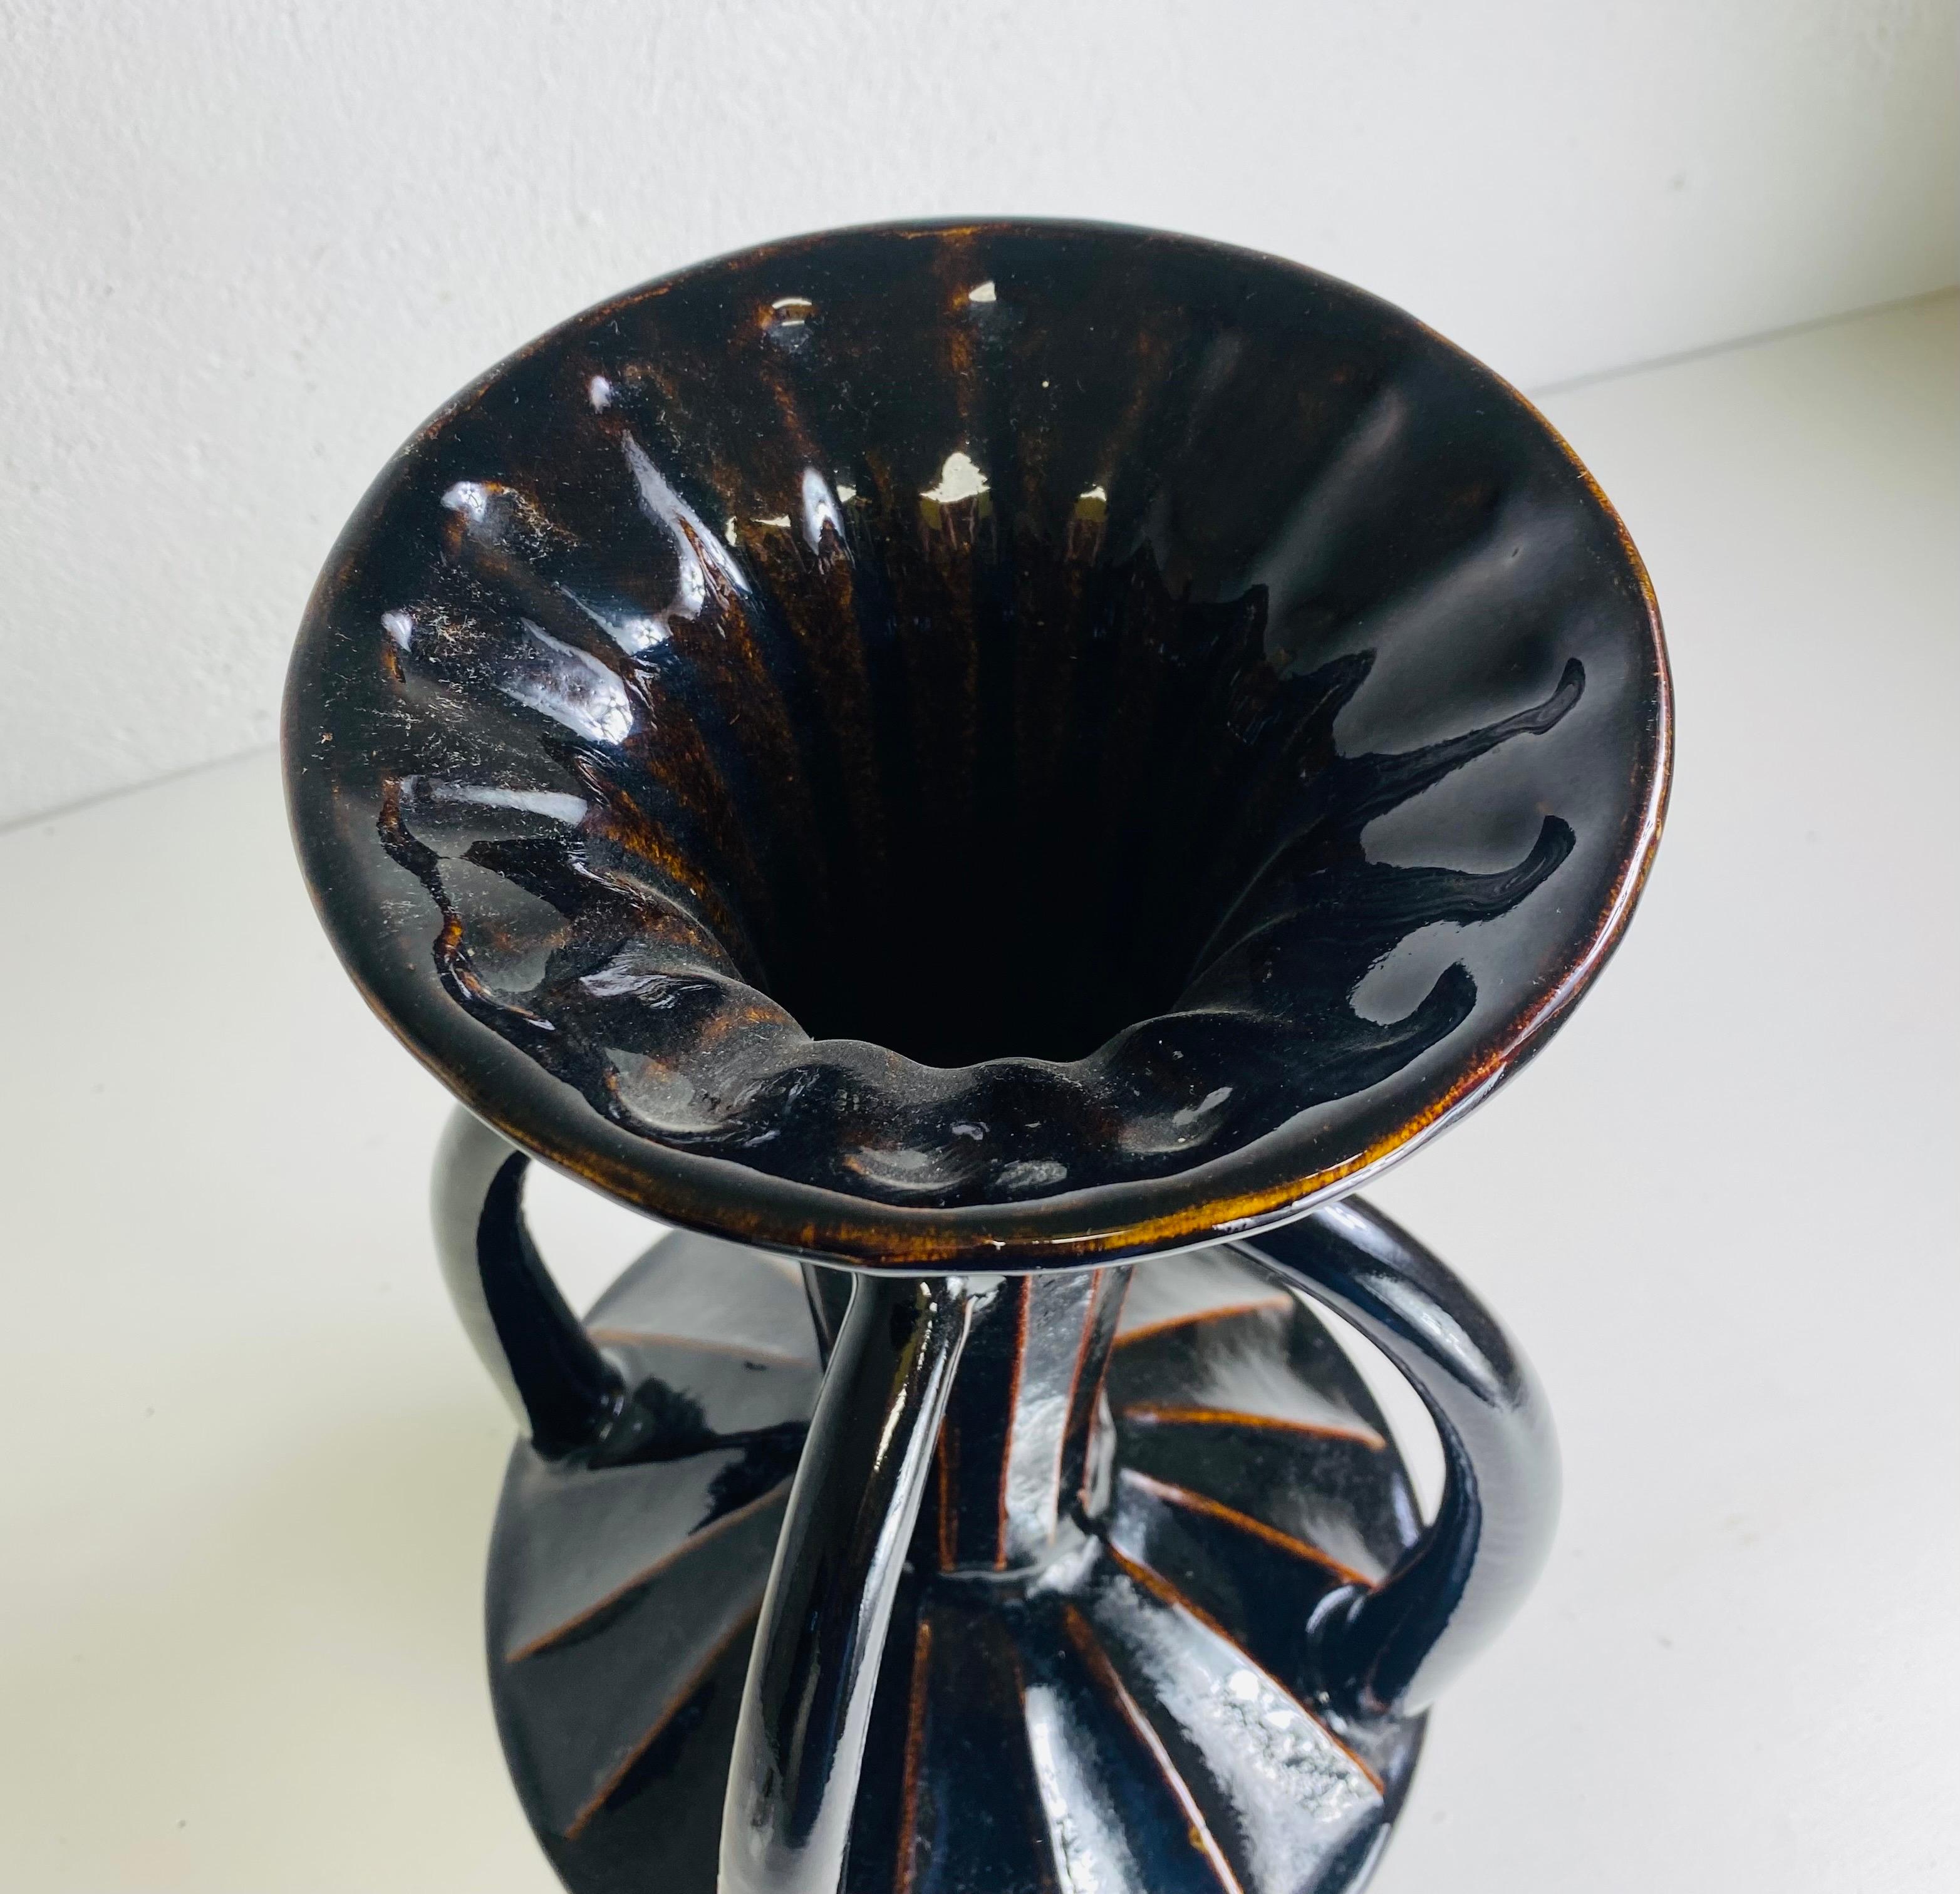 This is a large mid century vintage, espresso brown pottery vase. This vase features four large exaggerated handles with a ribbed detail to the center of the vase. This vase has a dark espresso brown glaze with an amber undertone.